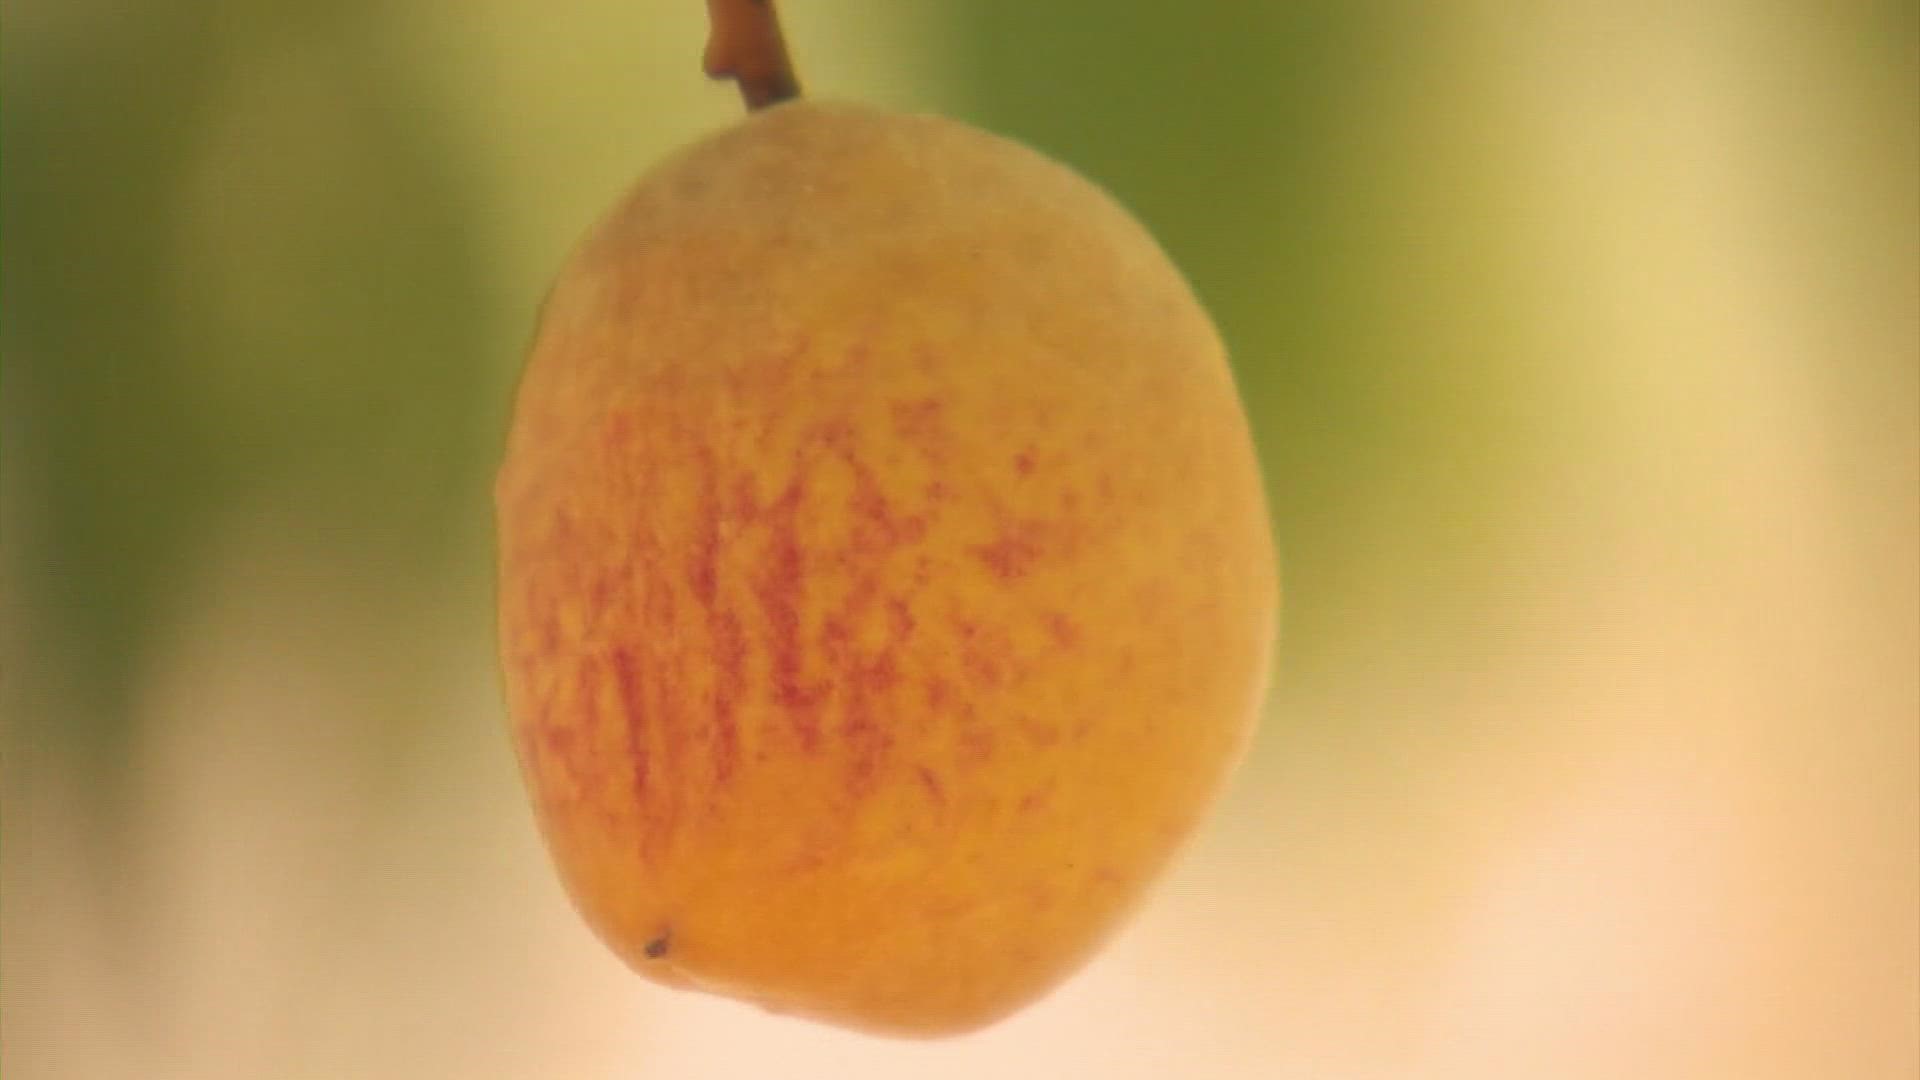 The Texas harvest was delayed three weeks this year because of a mild winter, and the drought the state has faced this summer has led to fewer peaches.